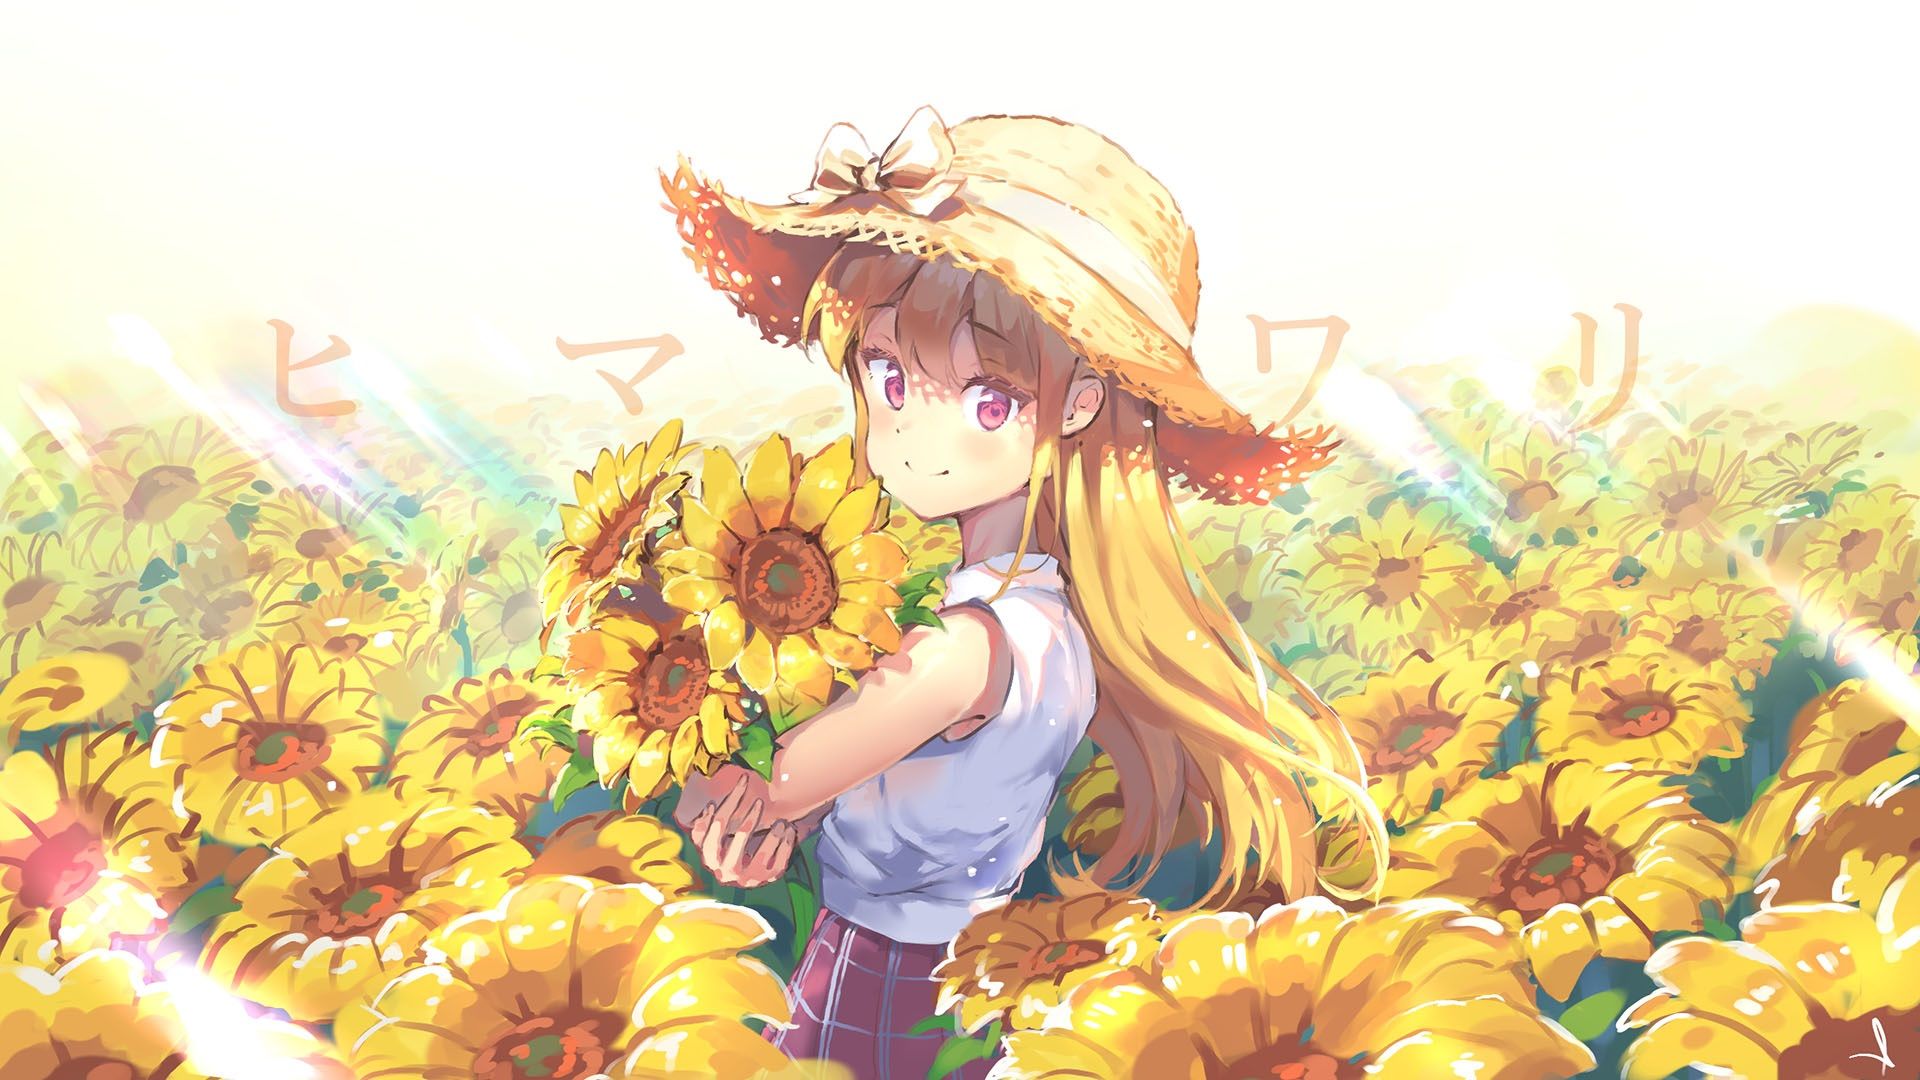 Cute anime girl with an armful of sunflowers HD Wallpaper